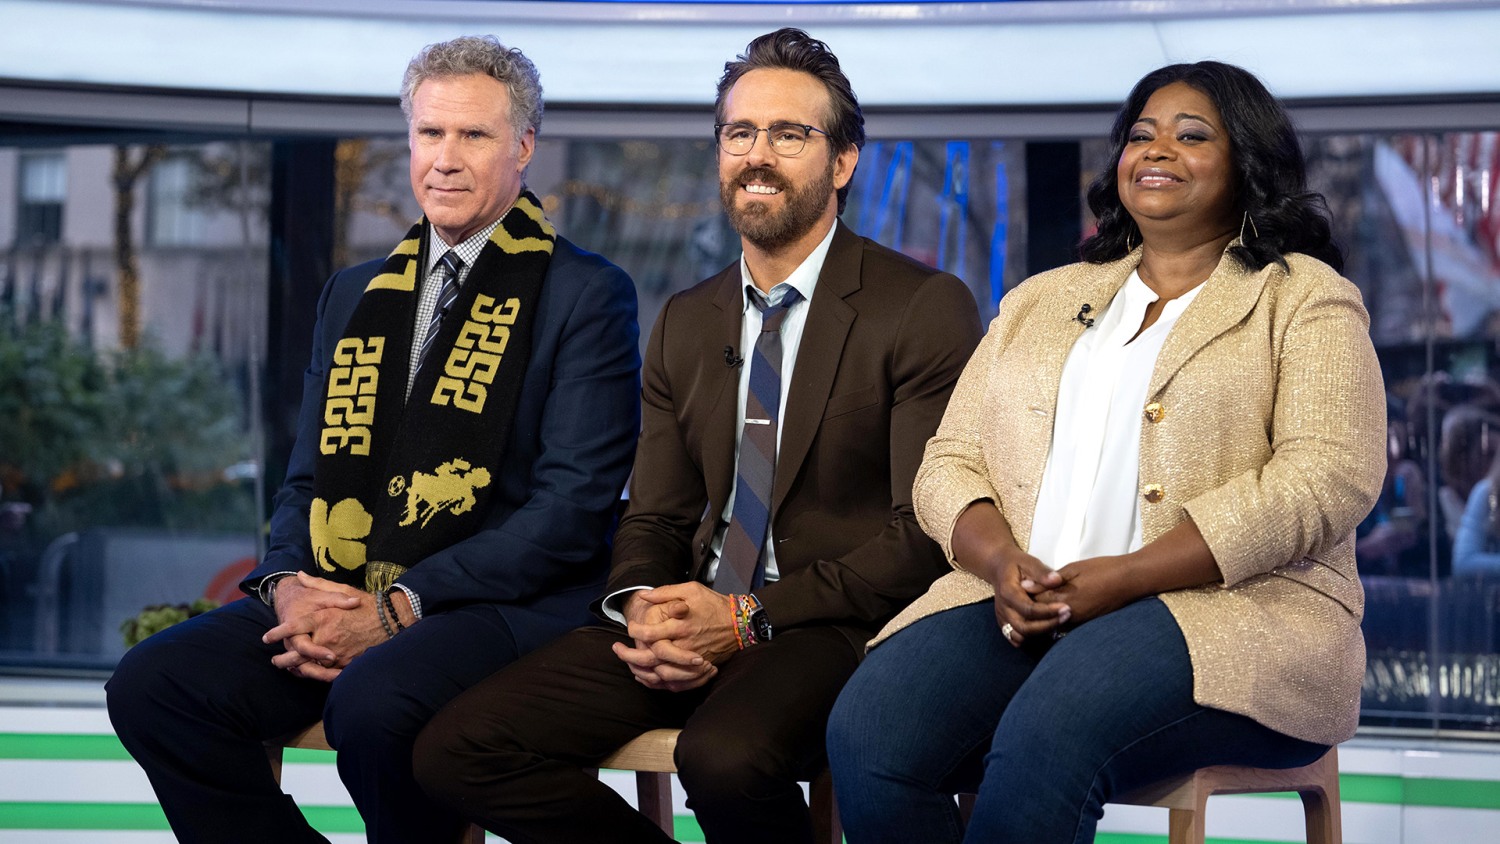 Where to Watch 'Spirited' Starring Ryan Reynolds and Will Ferrell